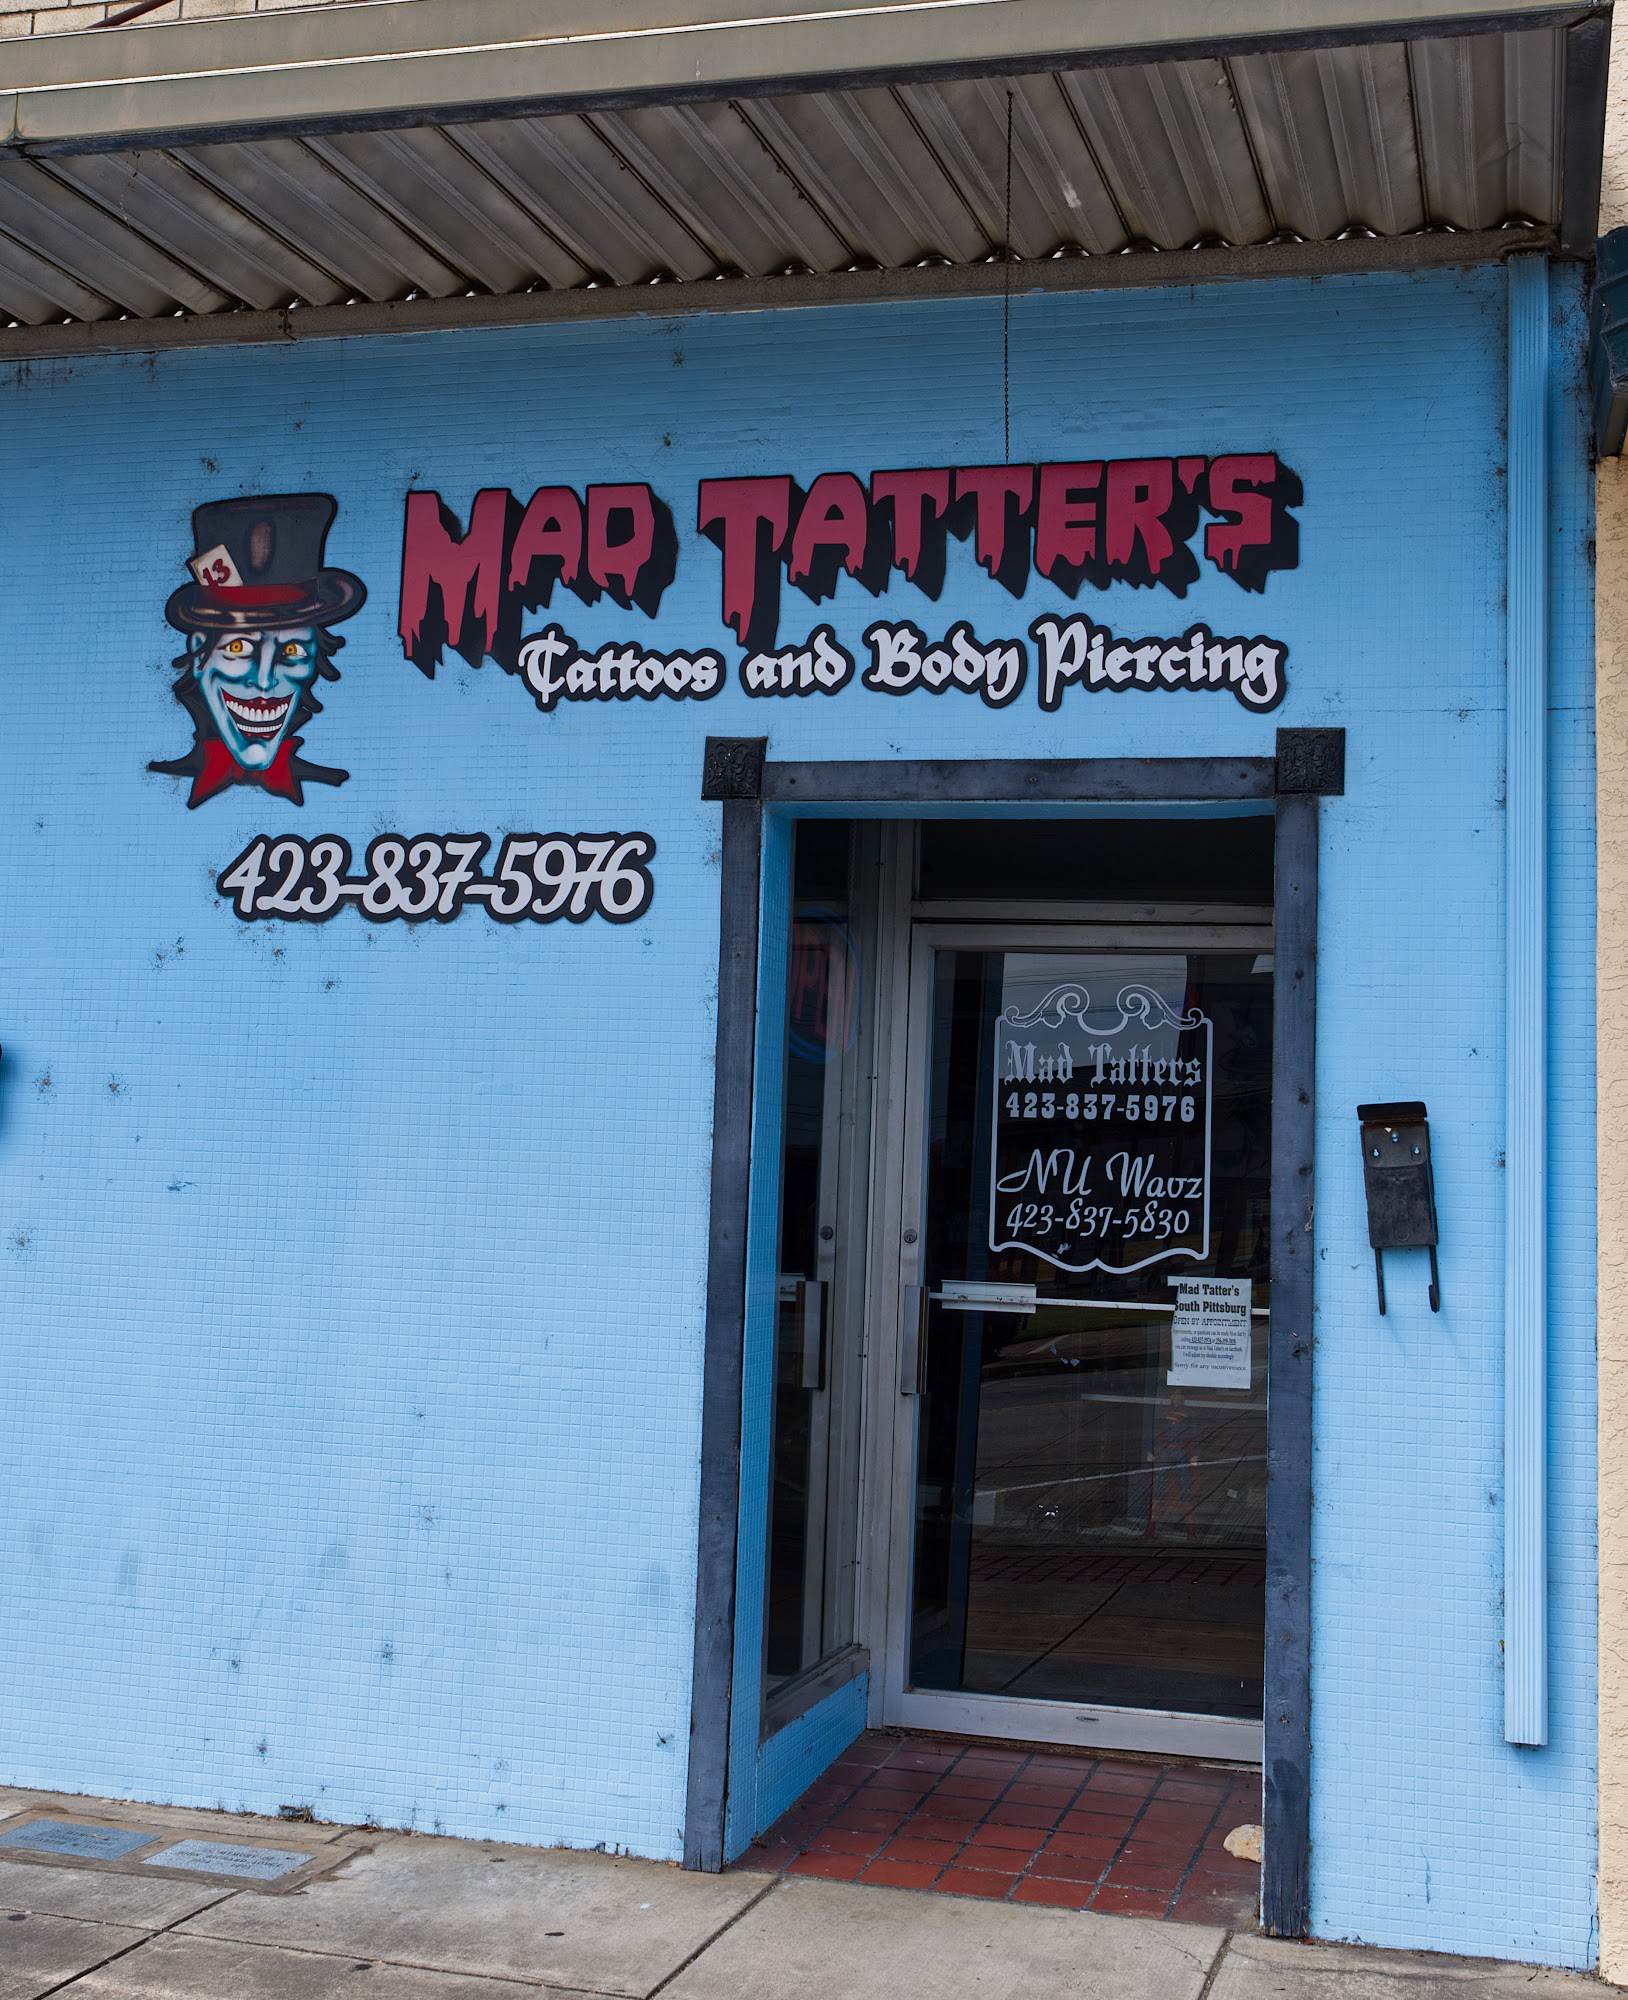 Mad Tatters 318 S Cedar Ave, South Pittsburg Tennessee 37380